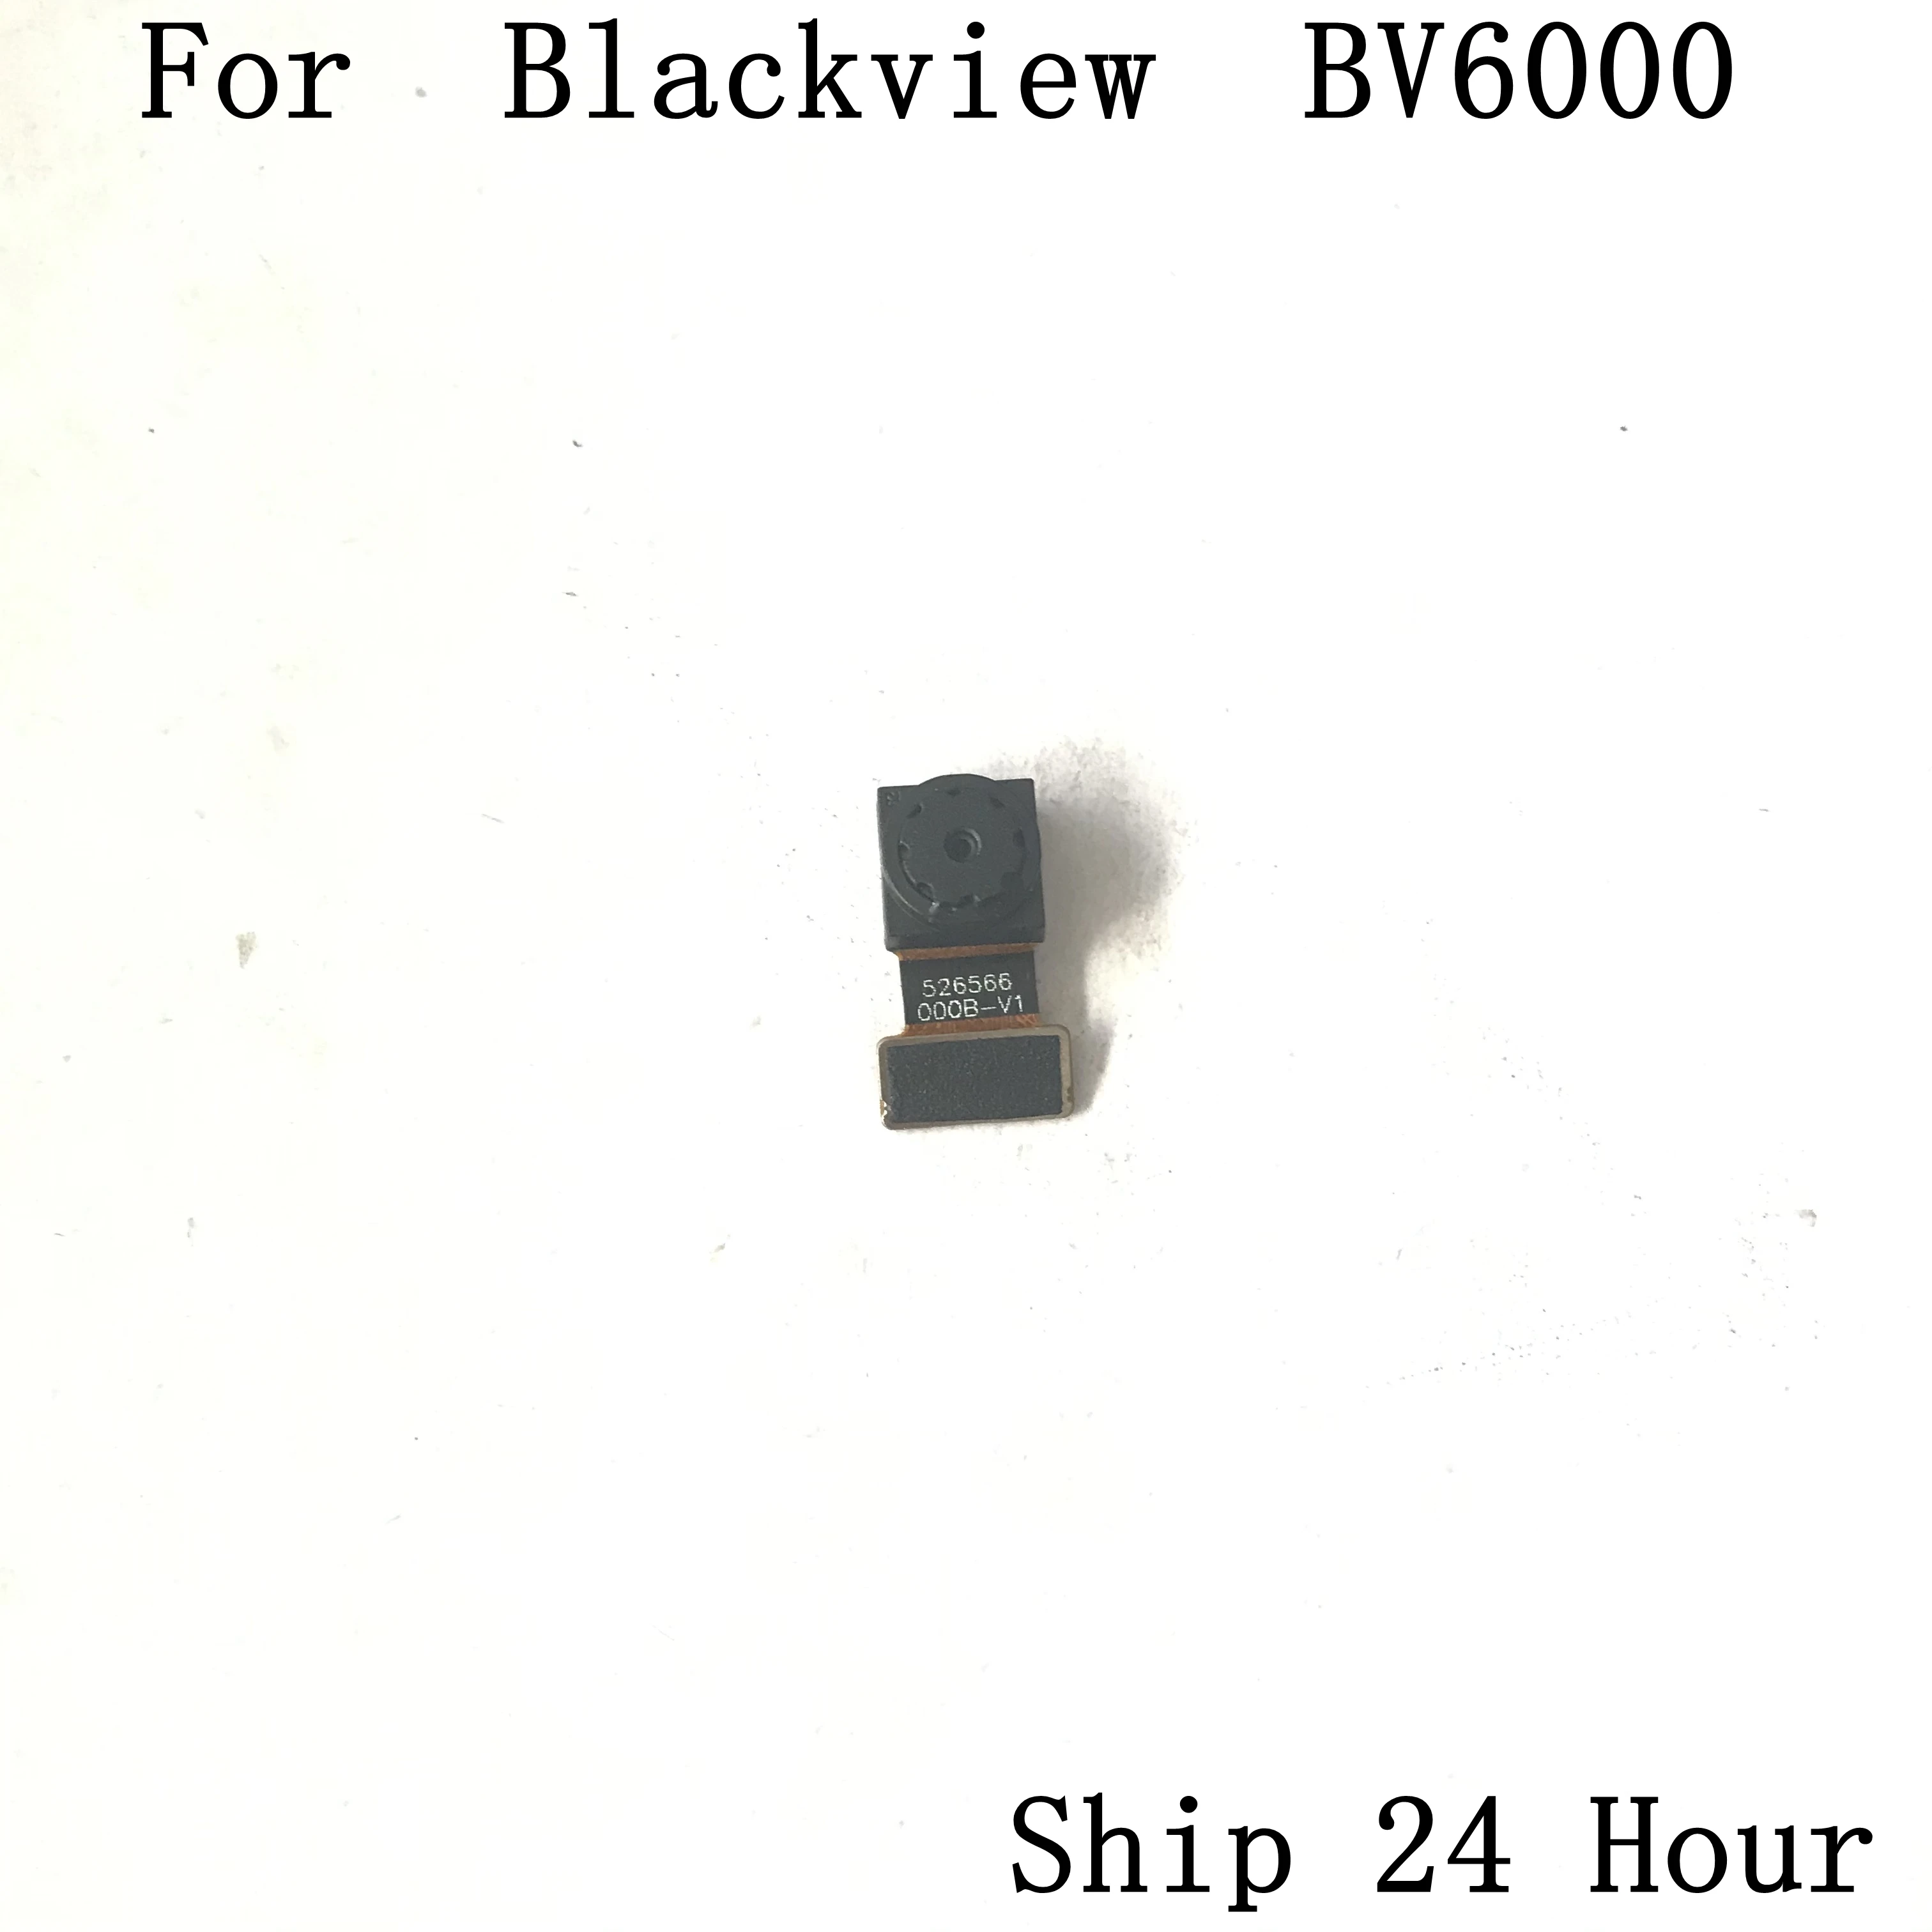 

Used Front Camera 5.0MP Module for Blackview BV6000 4.7 MT6755 Octa core 1280x720 shipping+tracking number